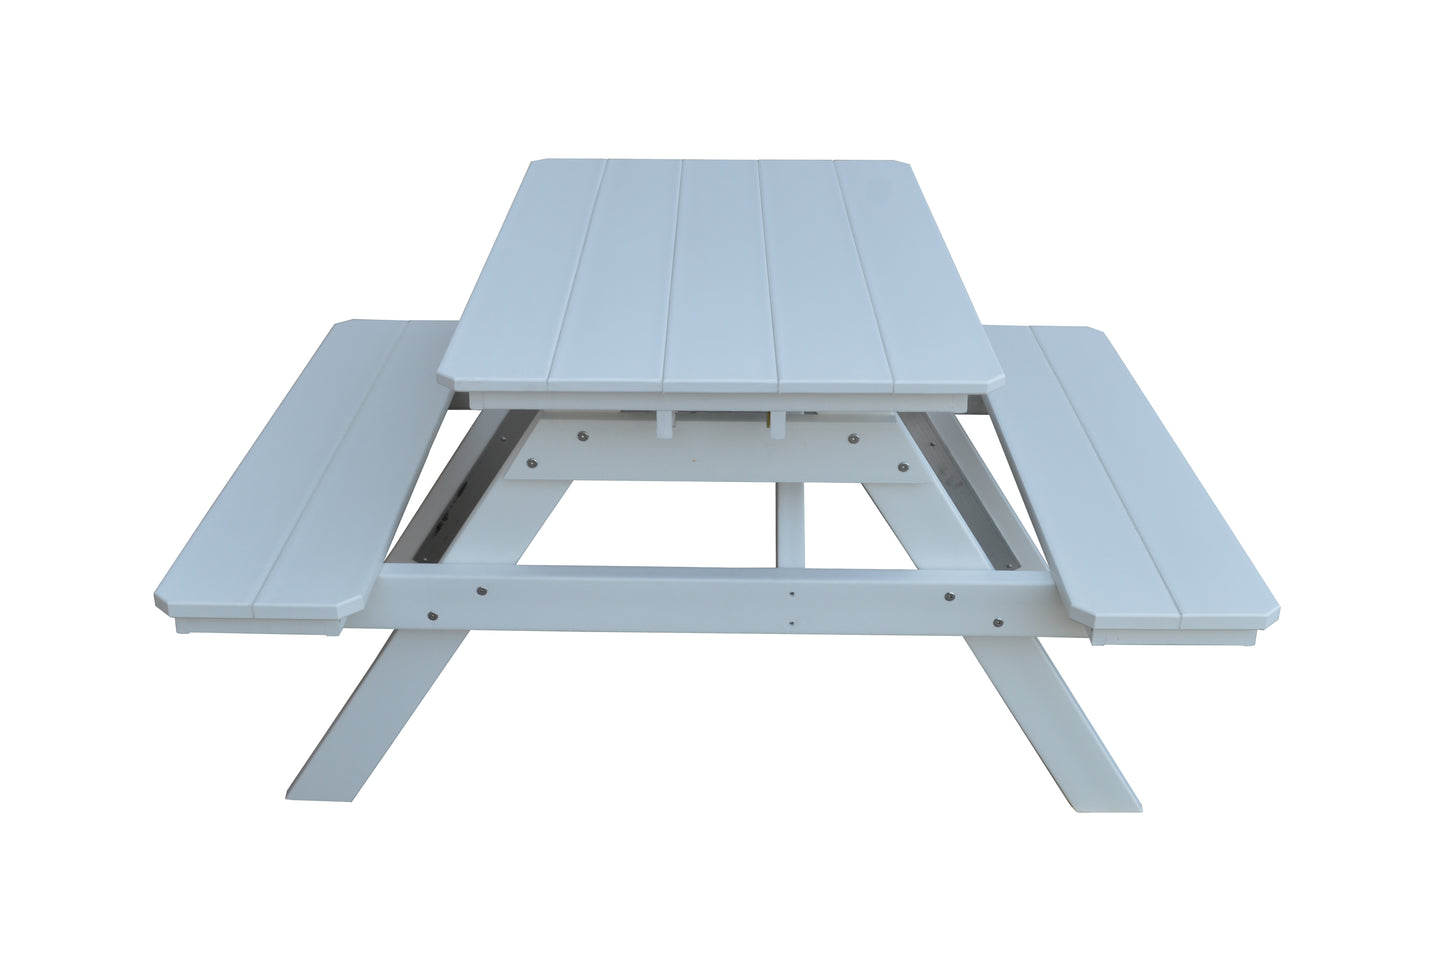 A&L Furniture Co. Recycled Plastic 4' Picnic Table  - LEAD TIME TO SHIP 10 BUSINESS DAYS